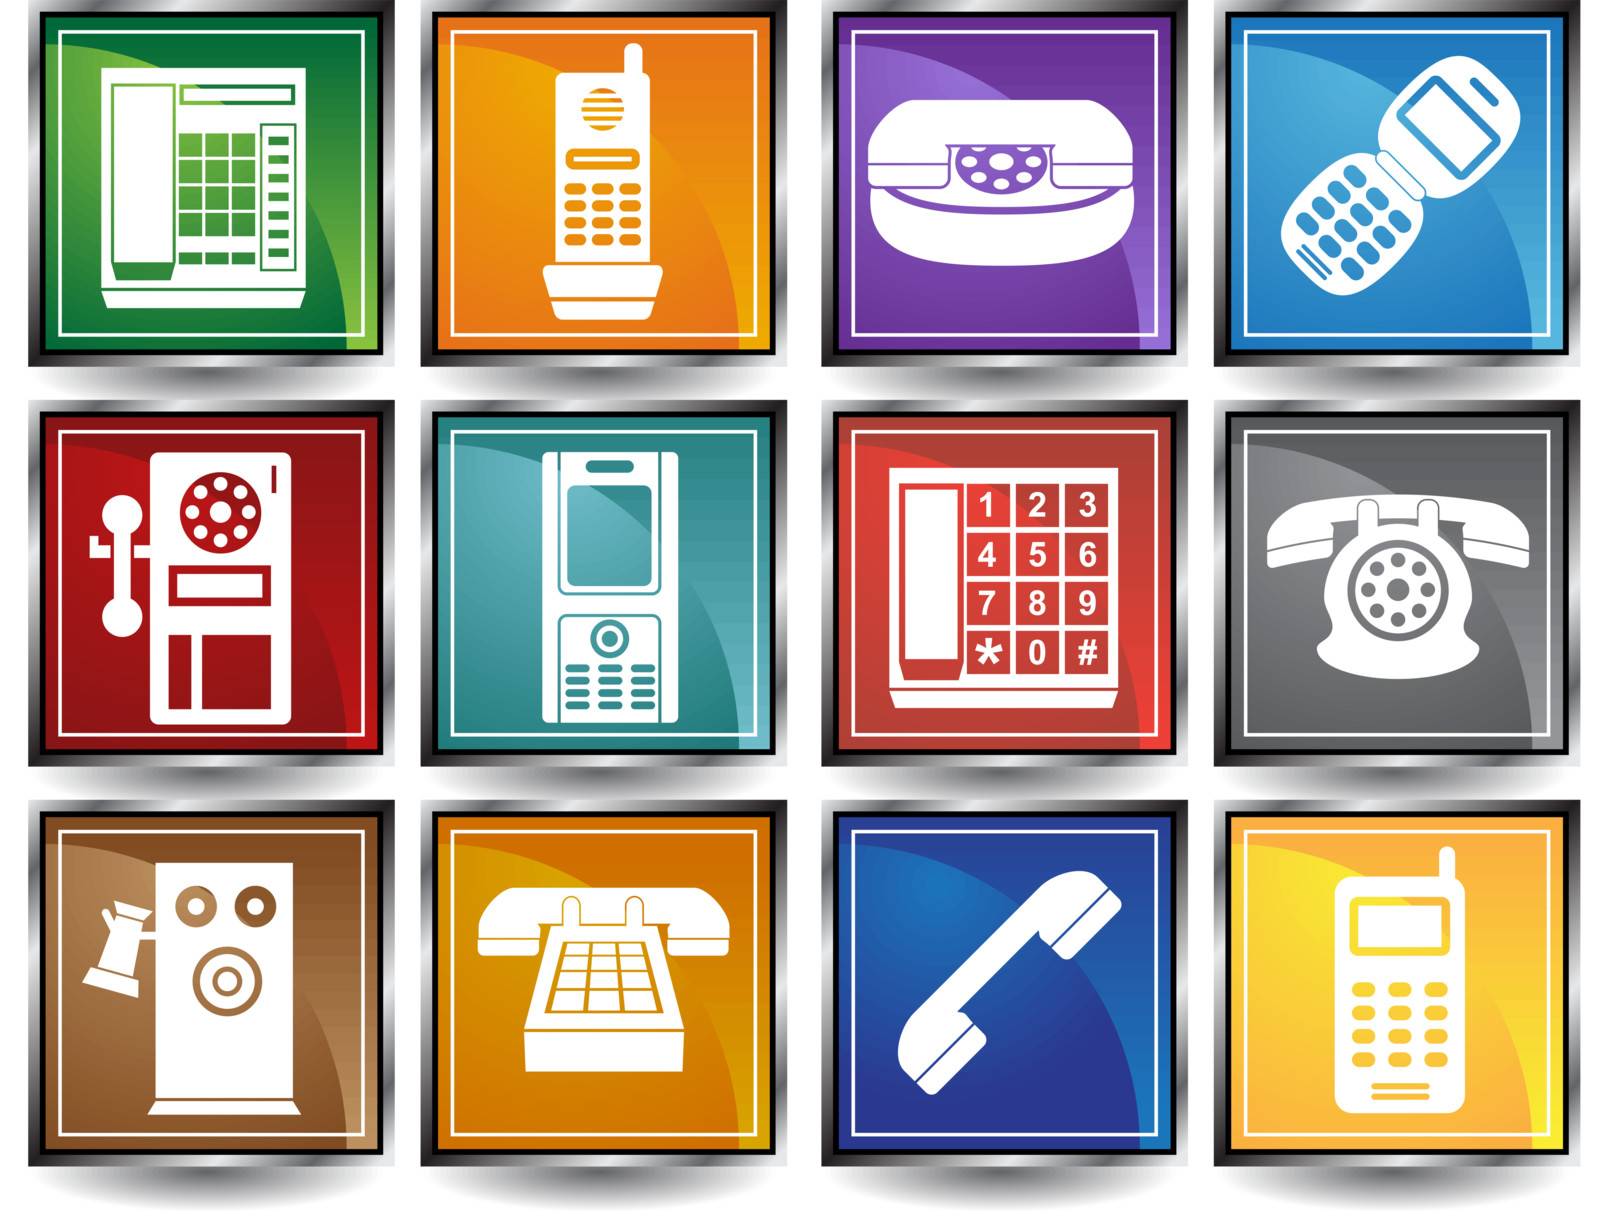 An image of a phone icon set.